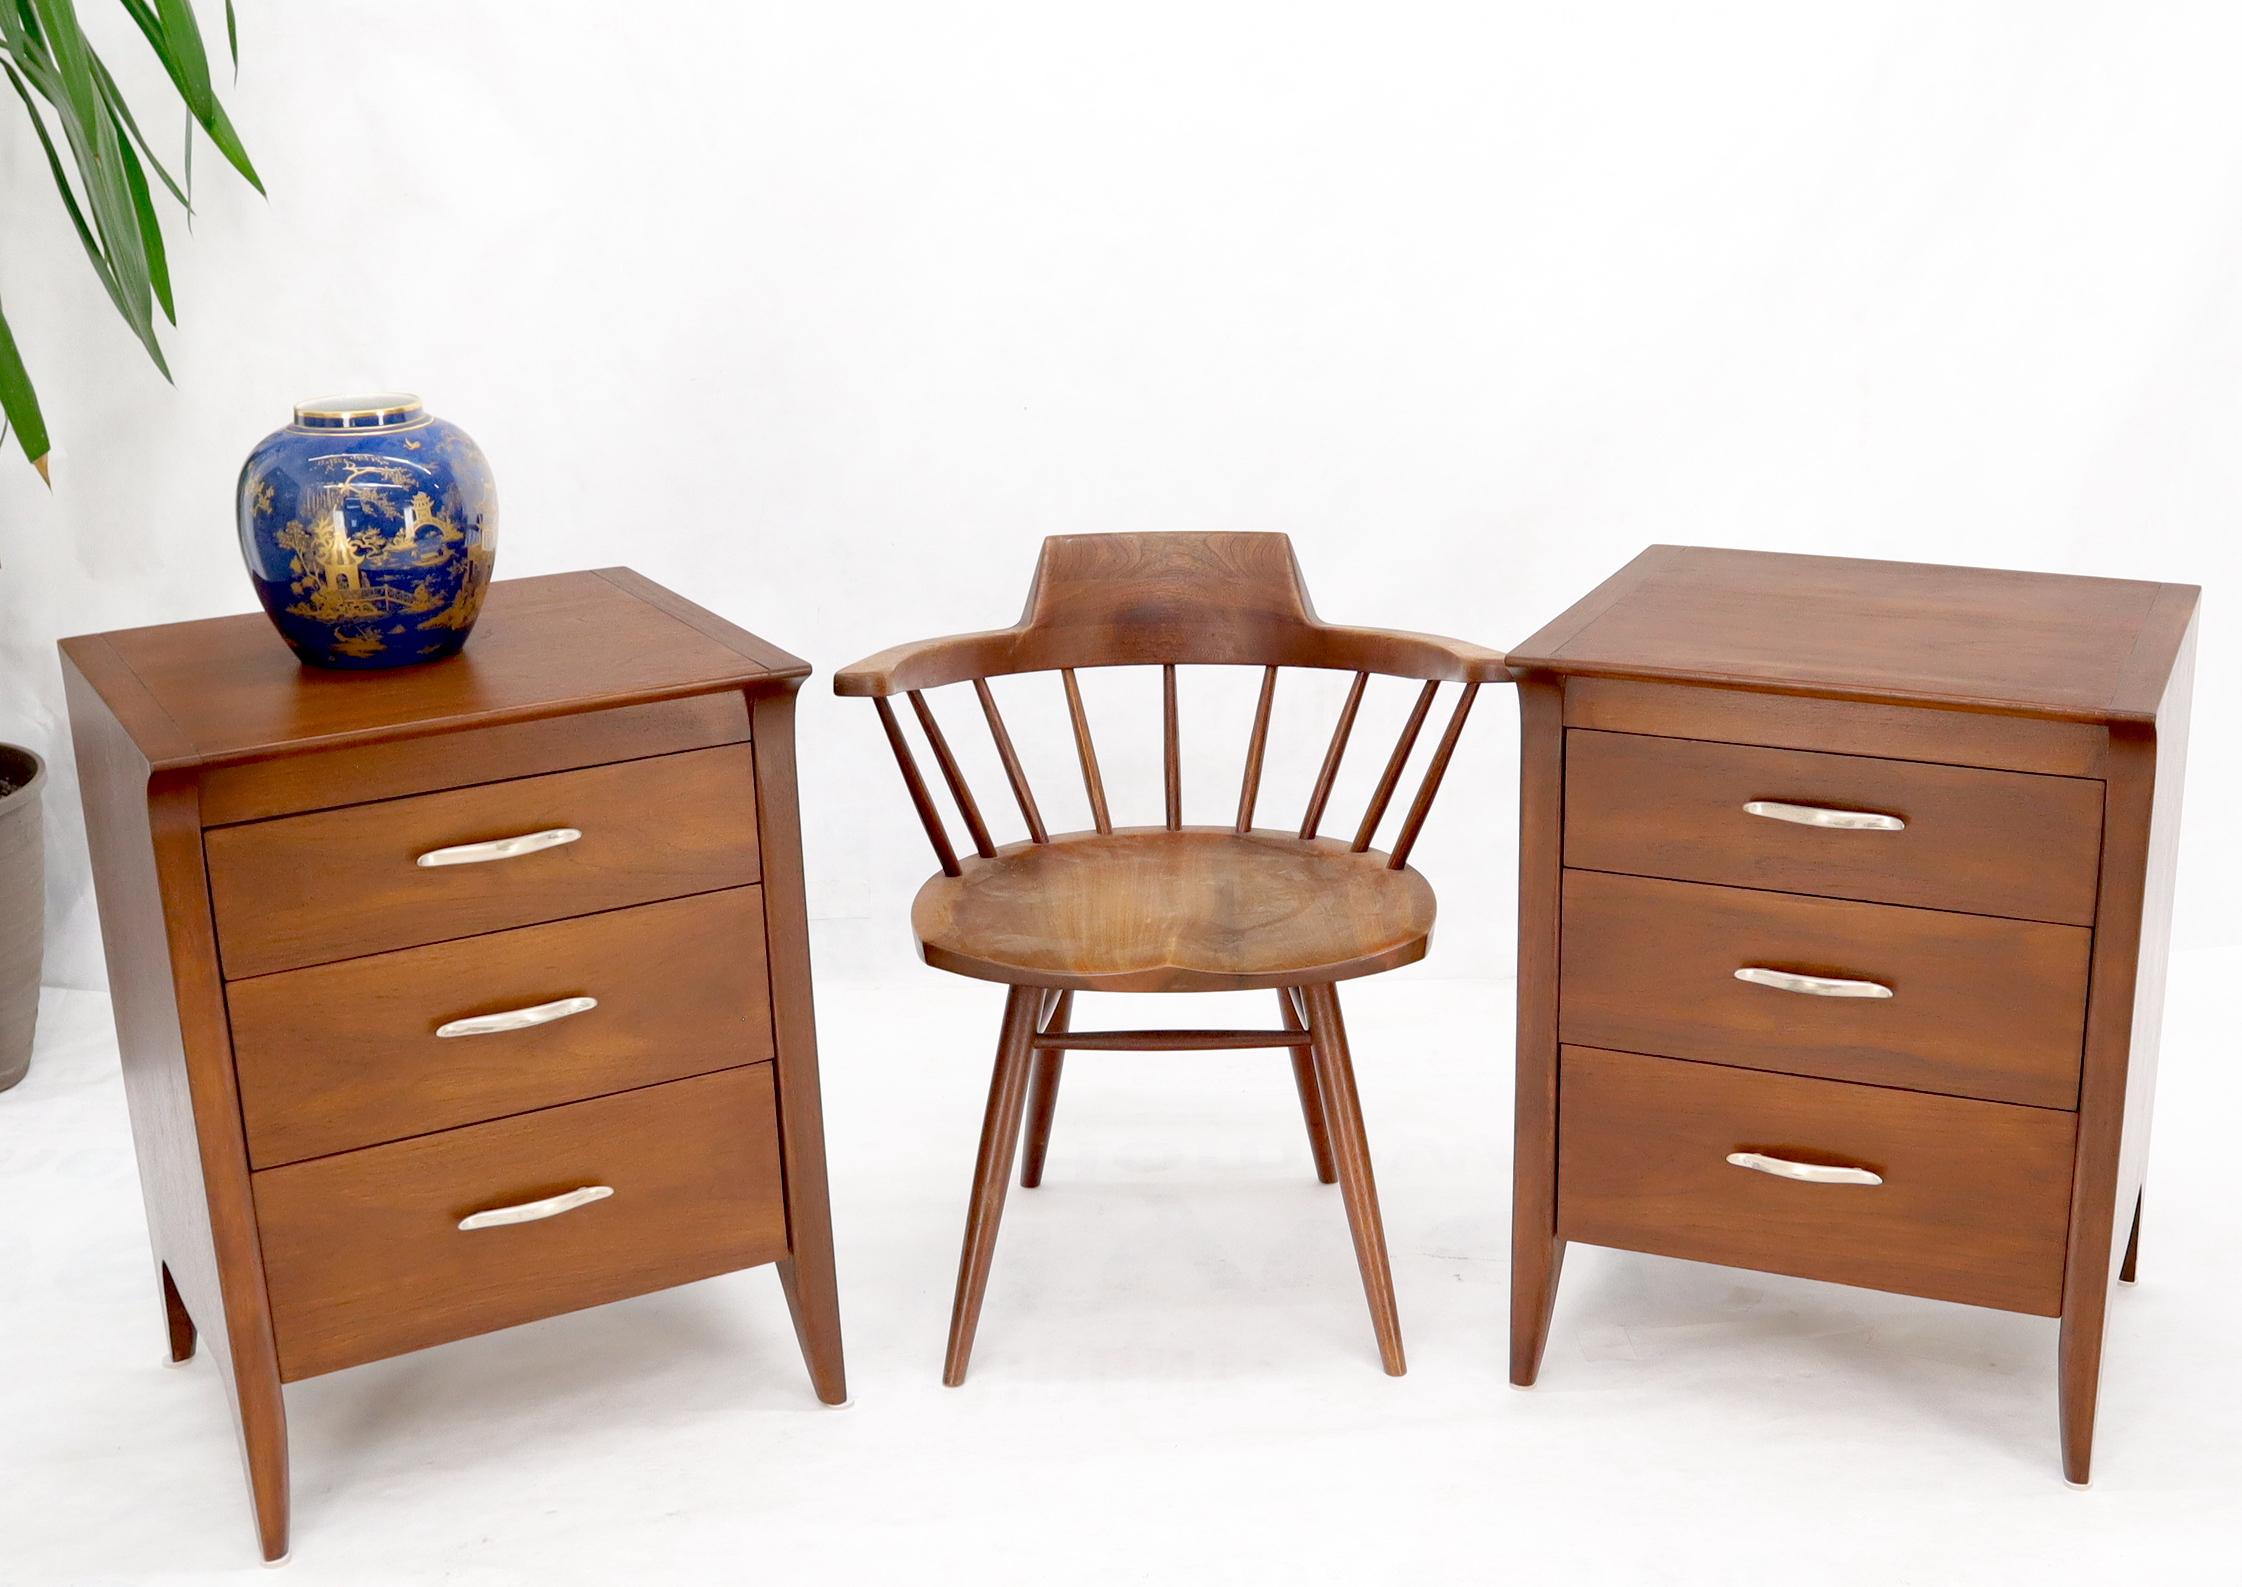 Pair of three drawers American walnut night stands end tables small chests.